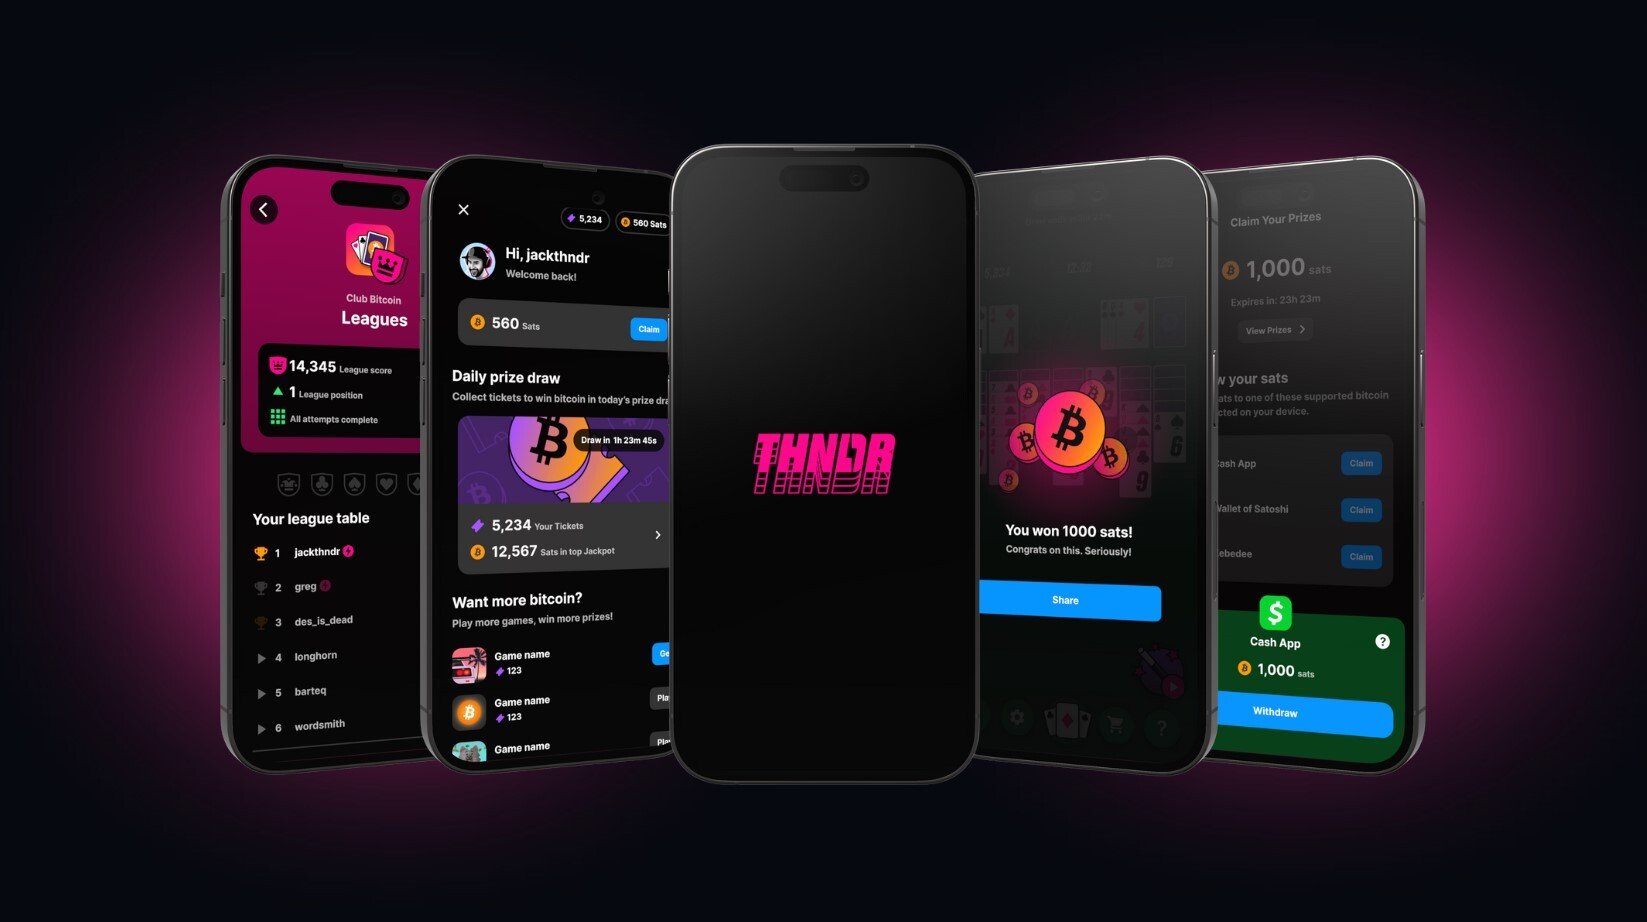  THNDR GAMES  Earn free bitcoin playing games!   Read More  